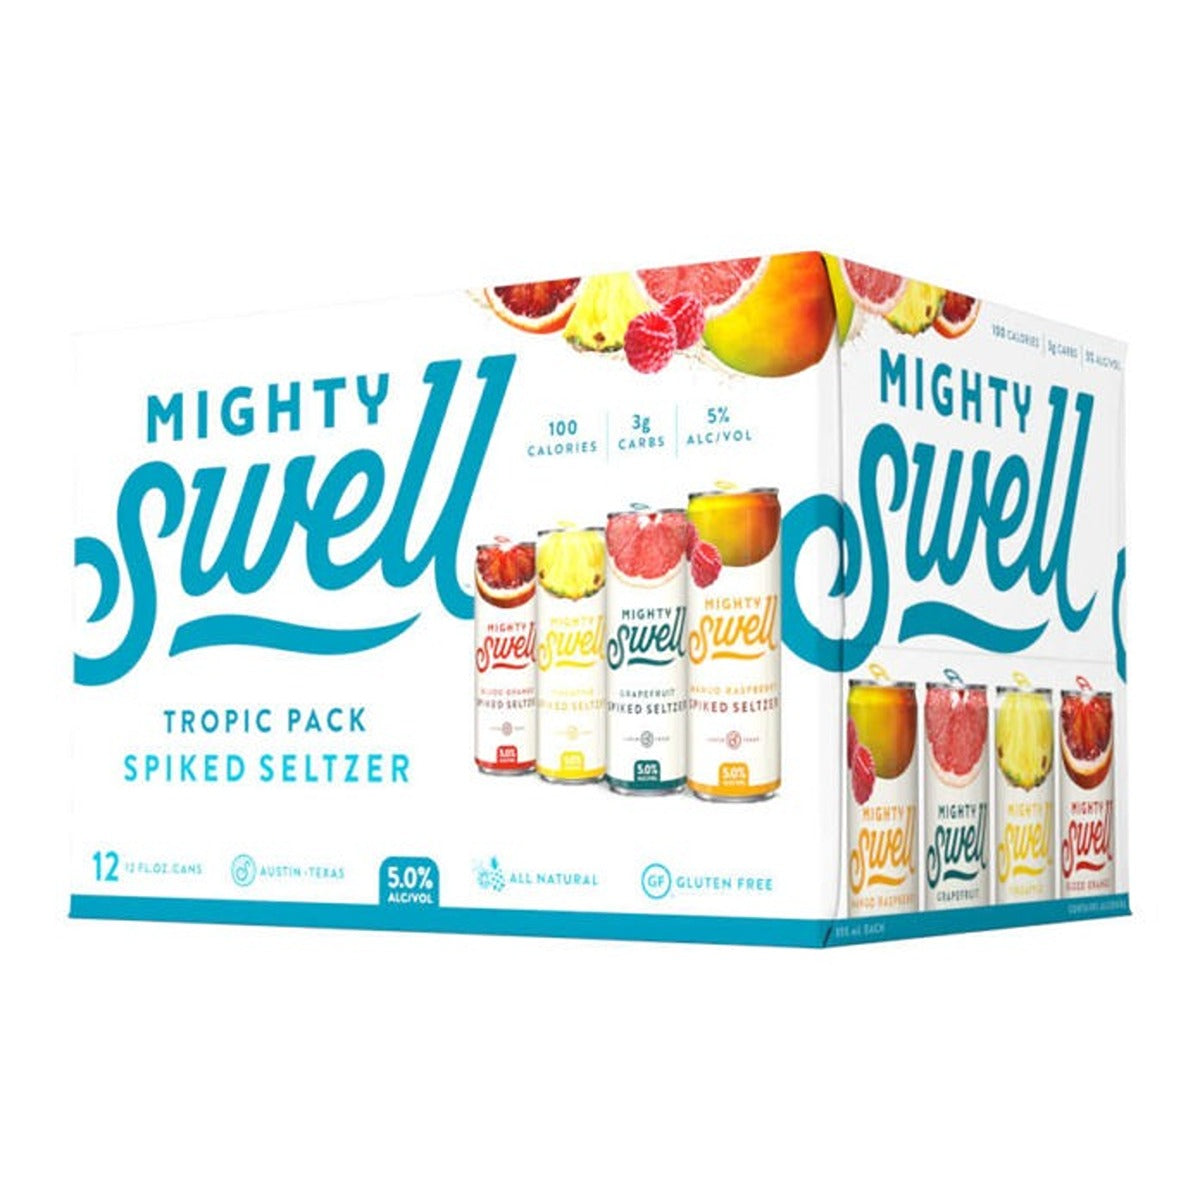 MIGHTY SWELL 6PK 12OZ CN